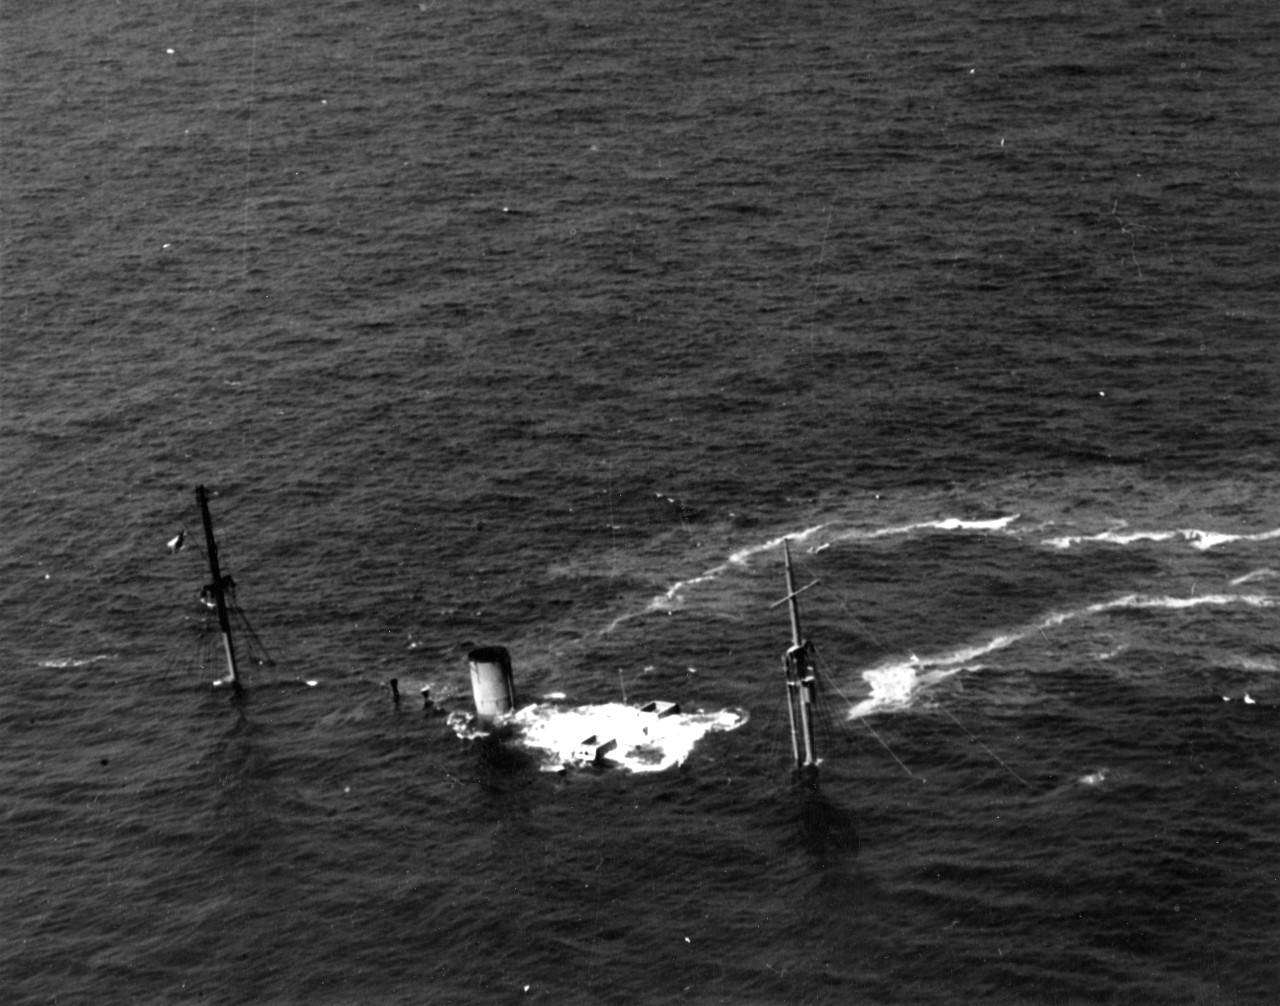 Empire Thrush, victim of U-203, lying on the bottom, 10-12 miles due east of the Cape Hatteras Lighthouse. Asterion rescued her entire crew on 14 April 1942. (U.S. Navy Photograph 80-CF-1054-3, National Archives and Records Administration, Still ...